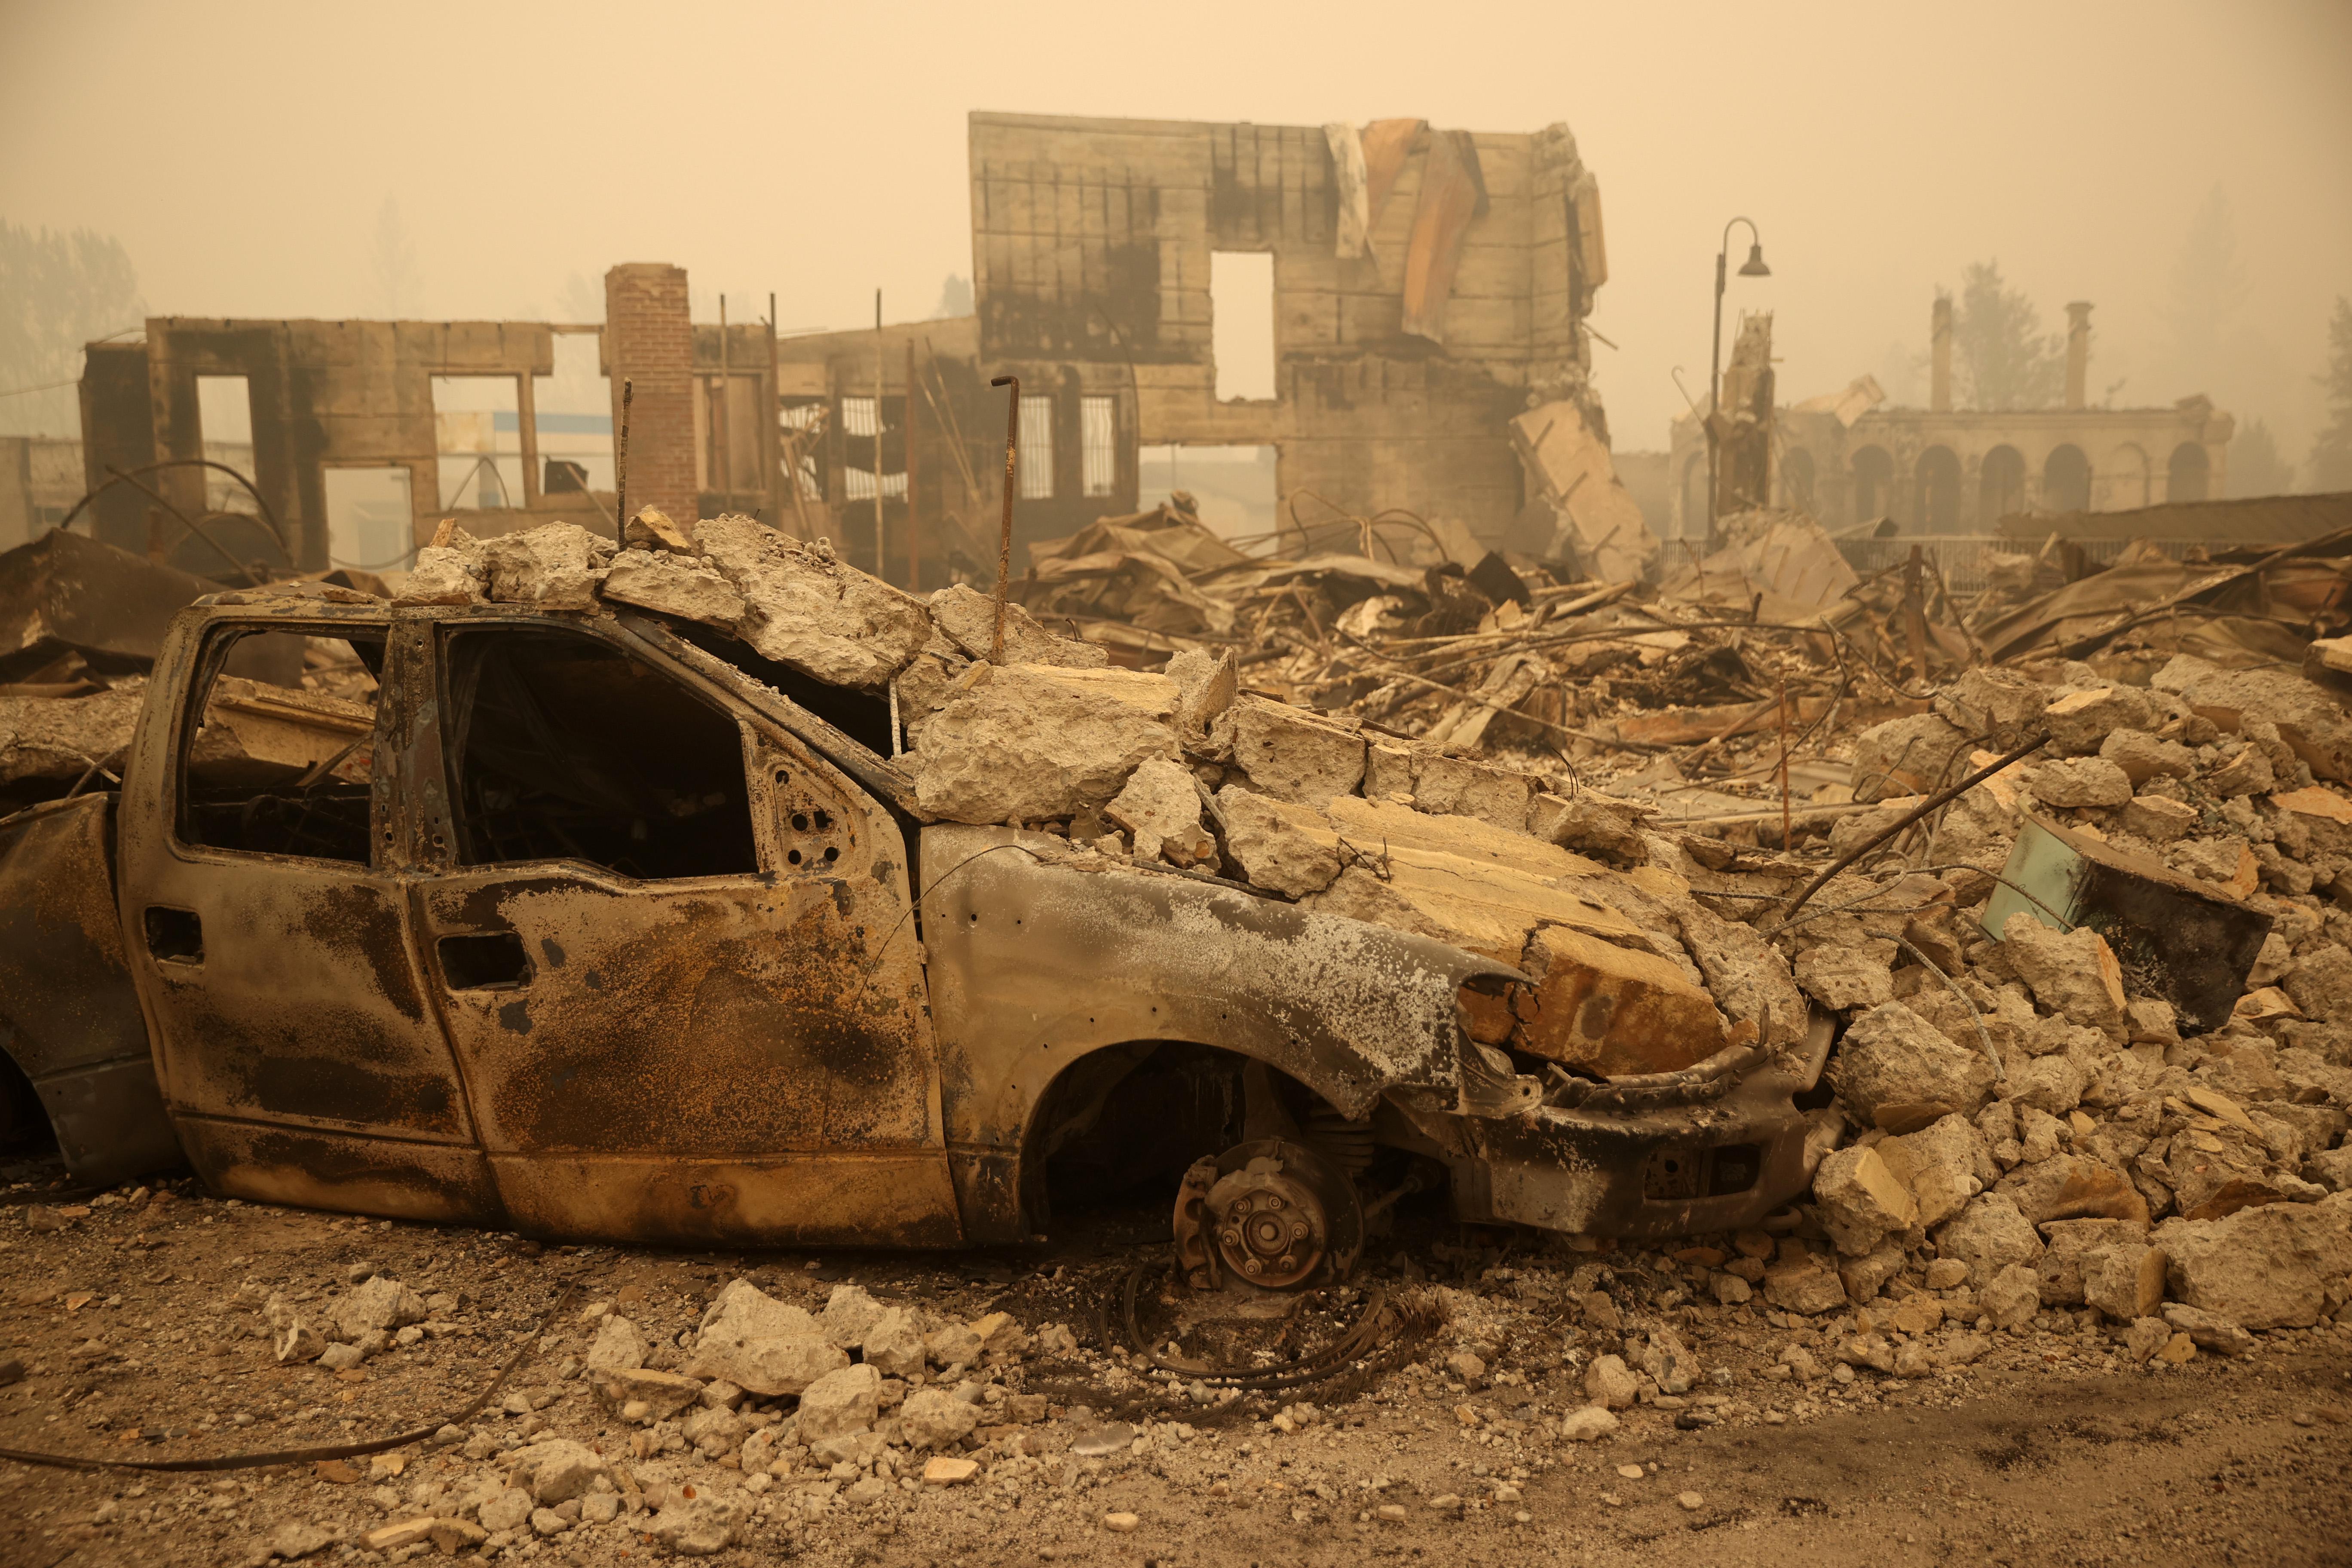 A burned truck is seen next to a pile of charred rubble and a damaged building.